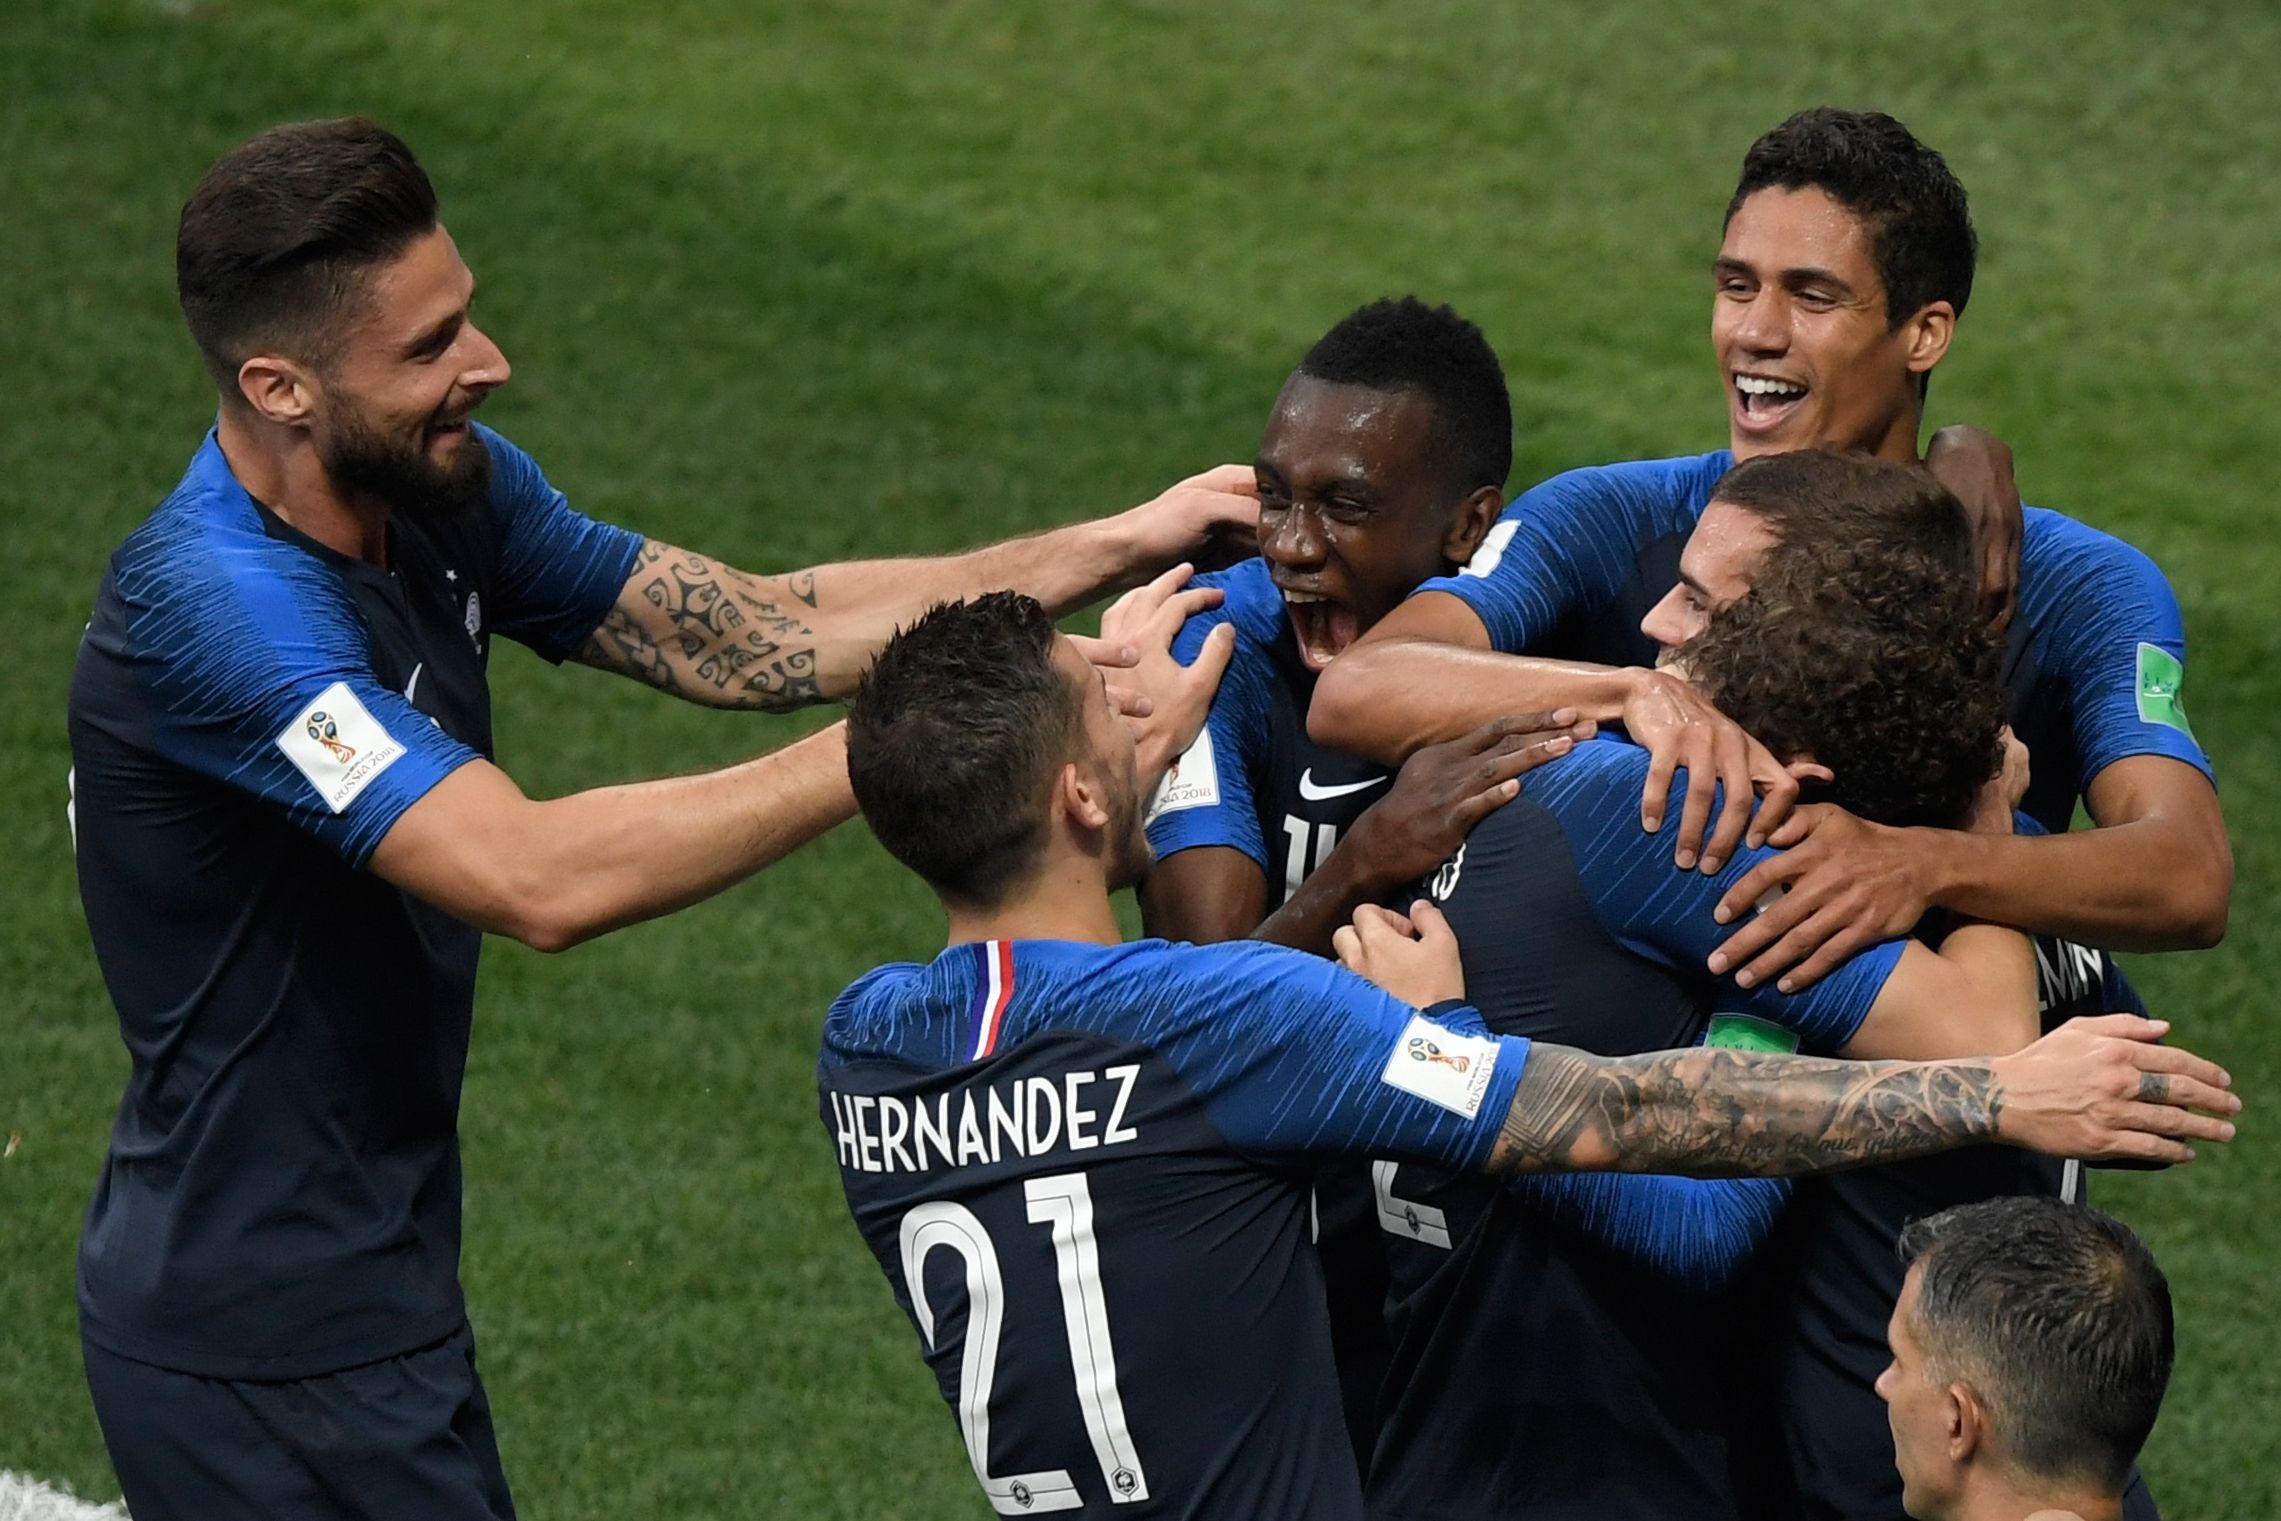 2018 World Cup Final: France Beats Croatia To Win Second Title